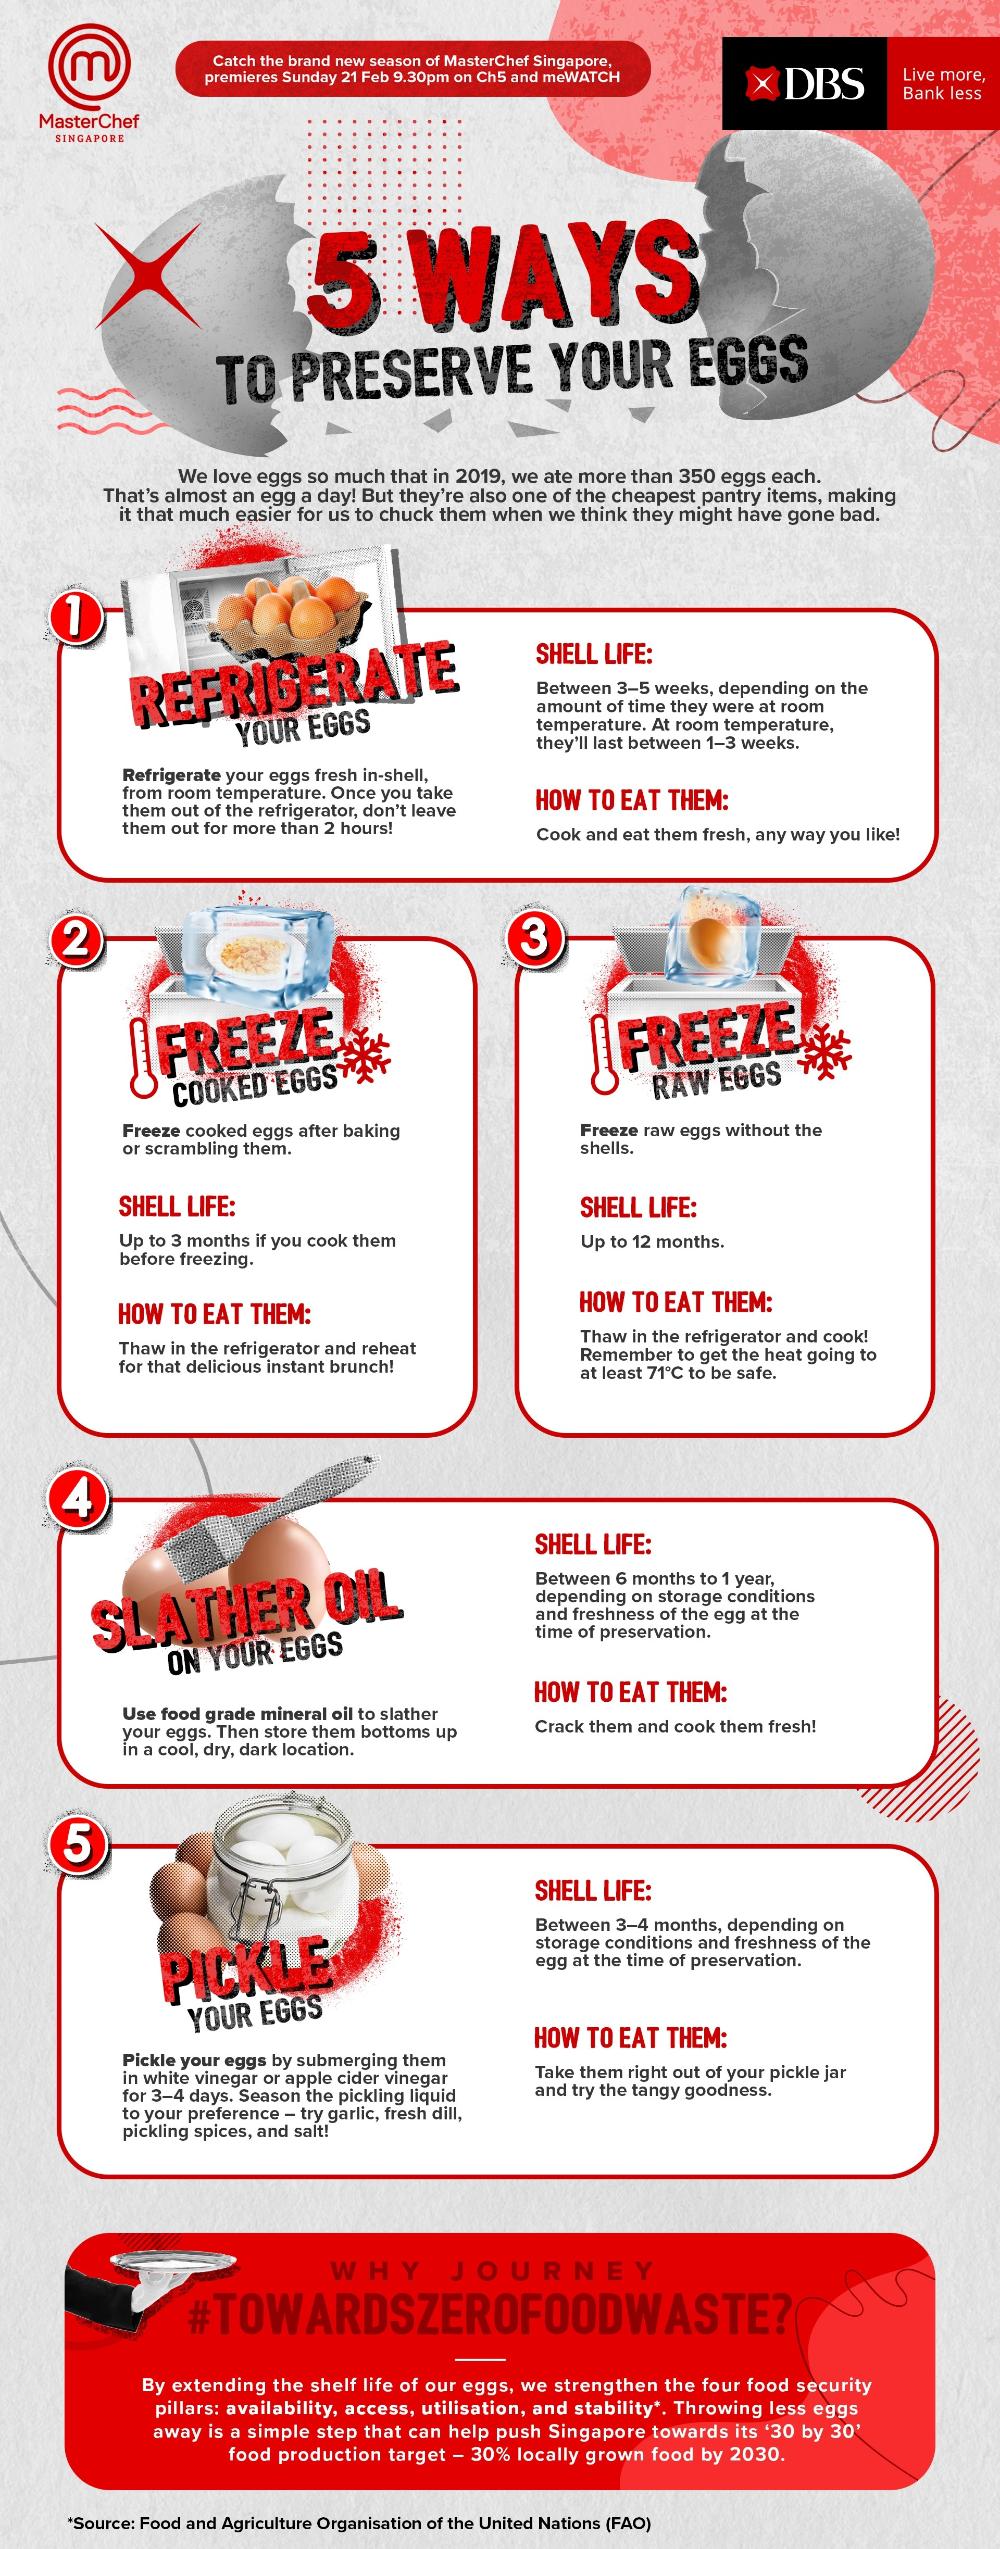 Infographic by MasterChef Singapore on 5 ways to preserve your eggs